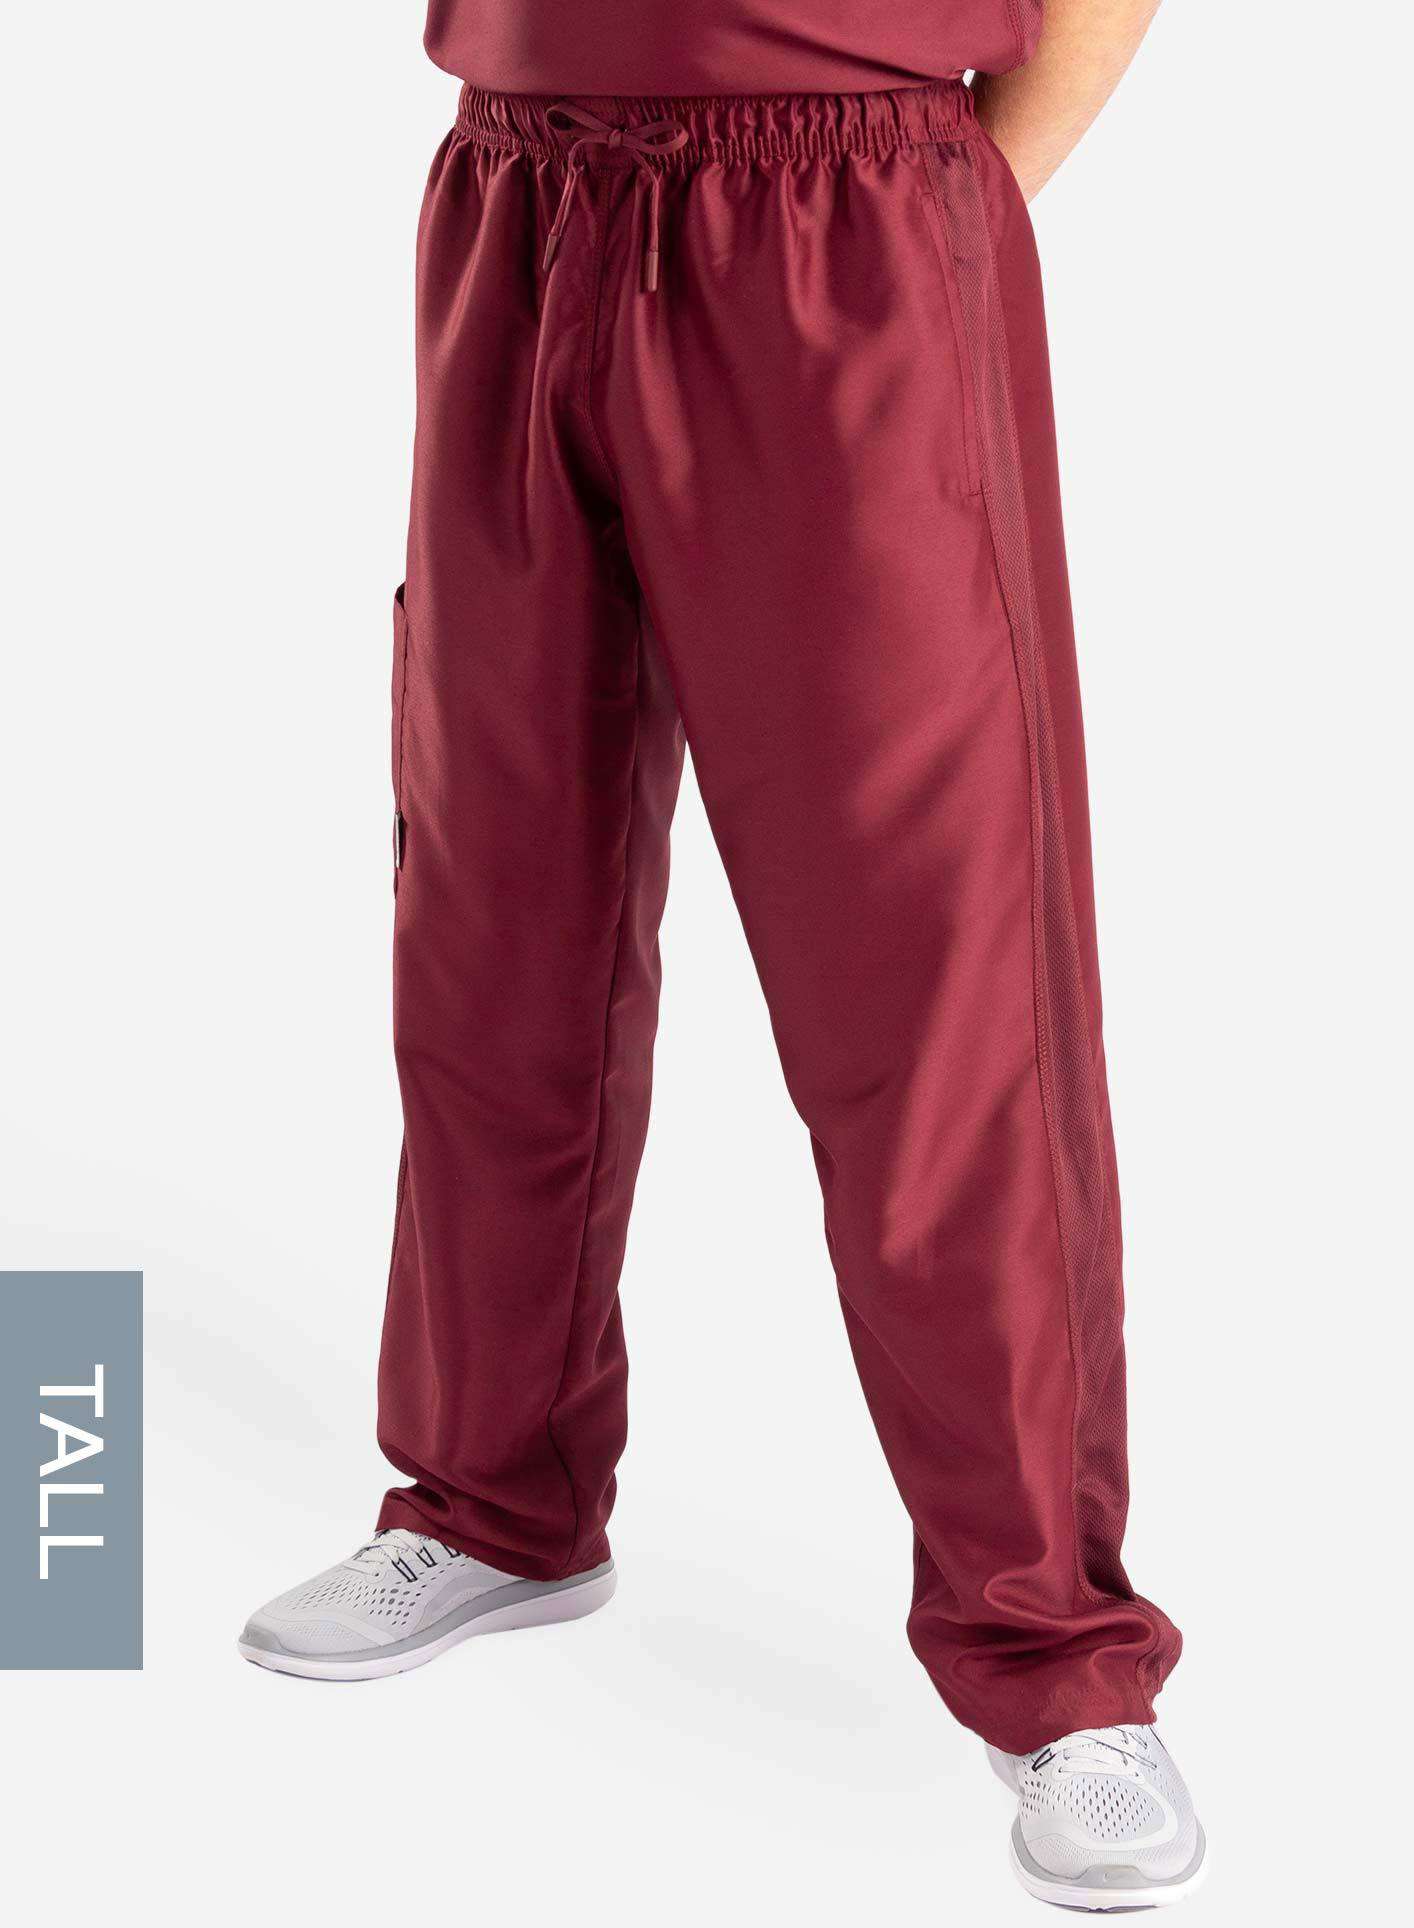 mens Elements tall relaxed fit scrub pants bold burgundy